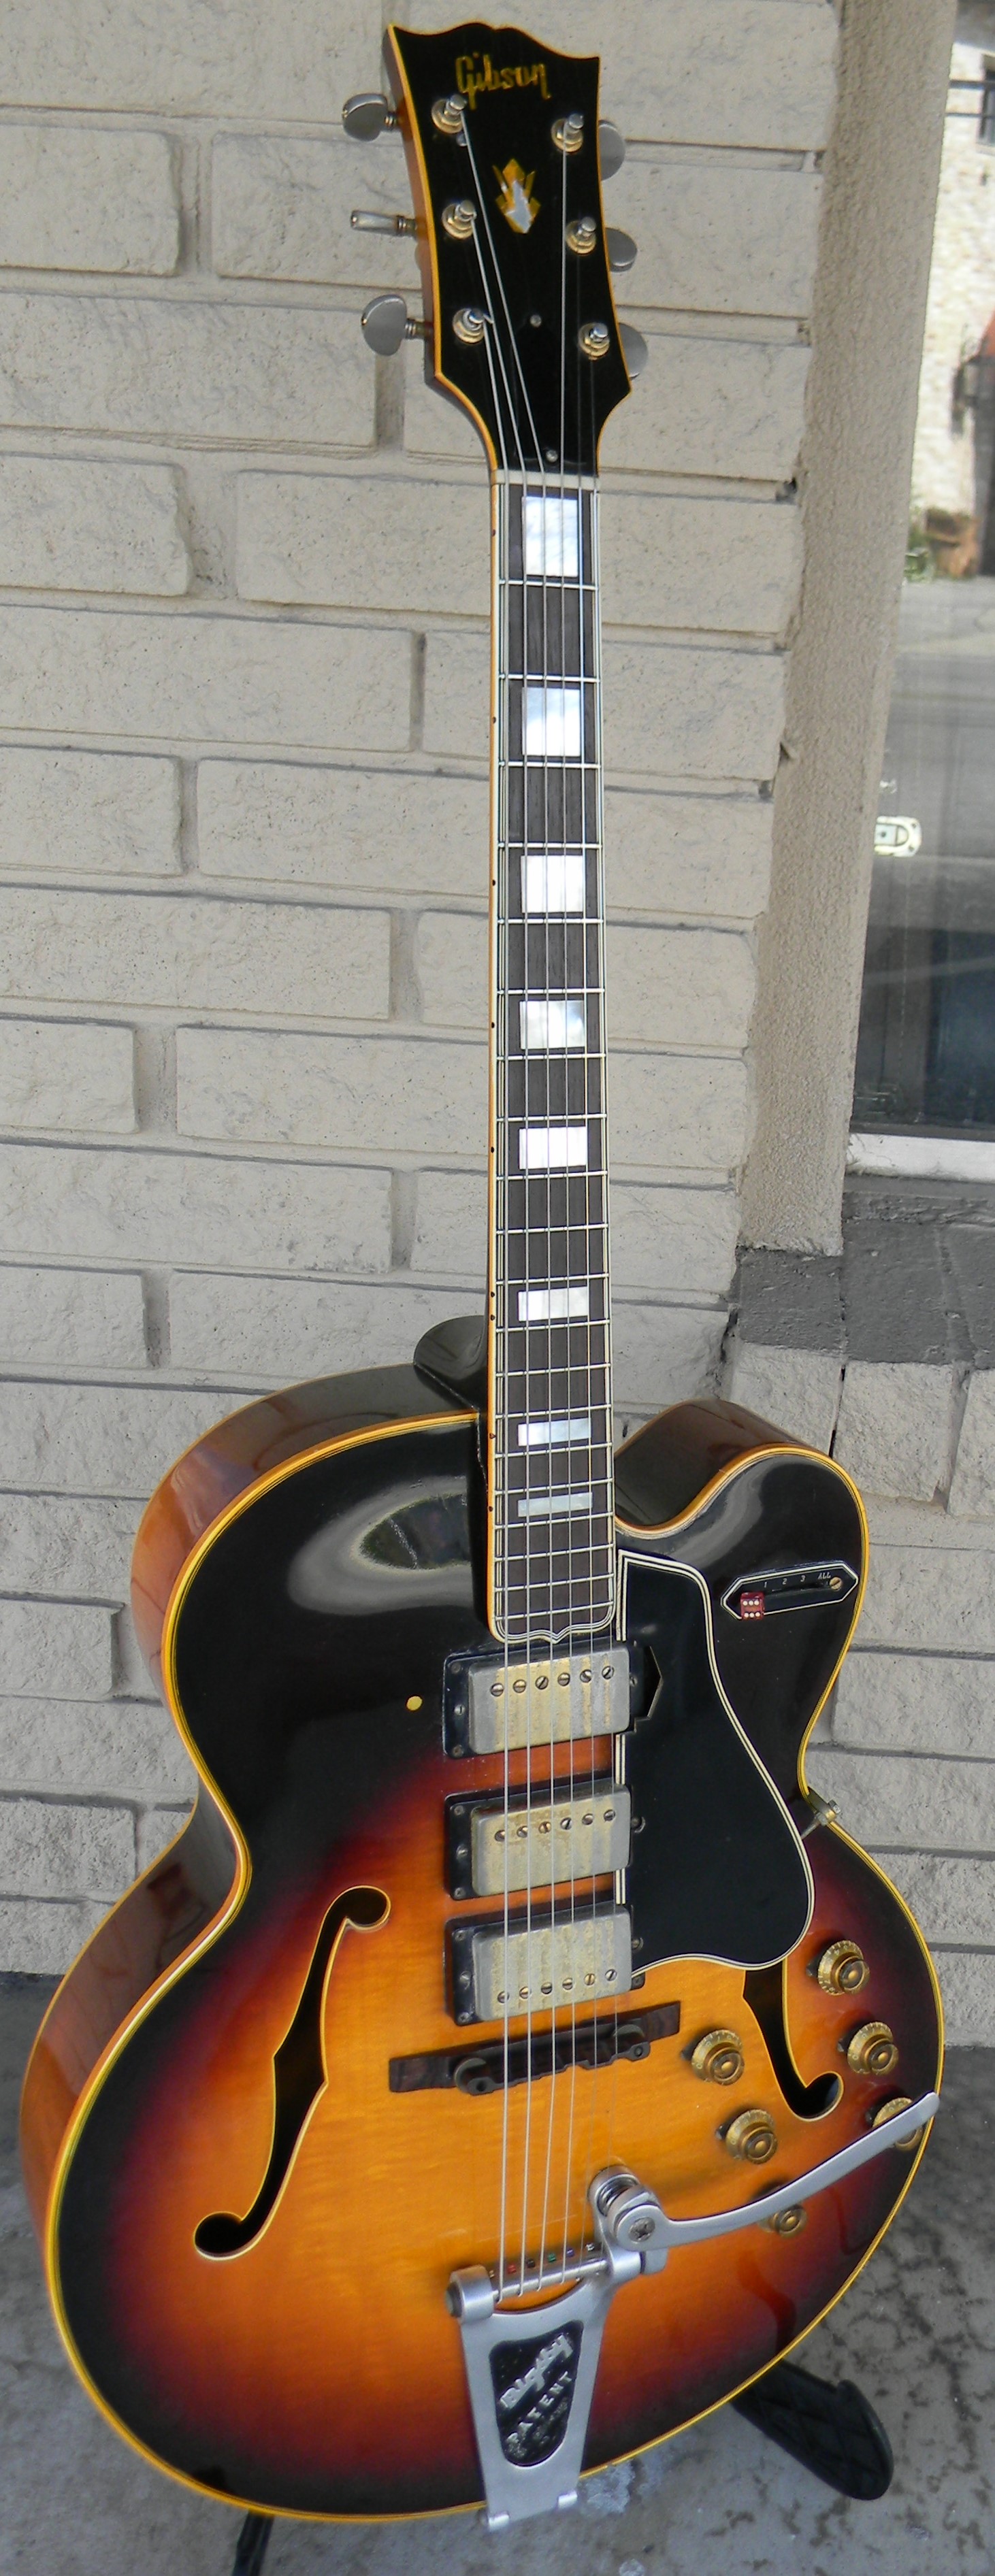 1958 Gibson ES 5 Switchmaster $14,000.00